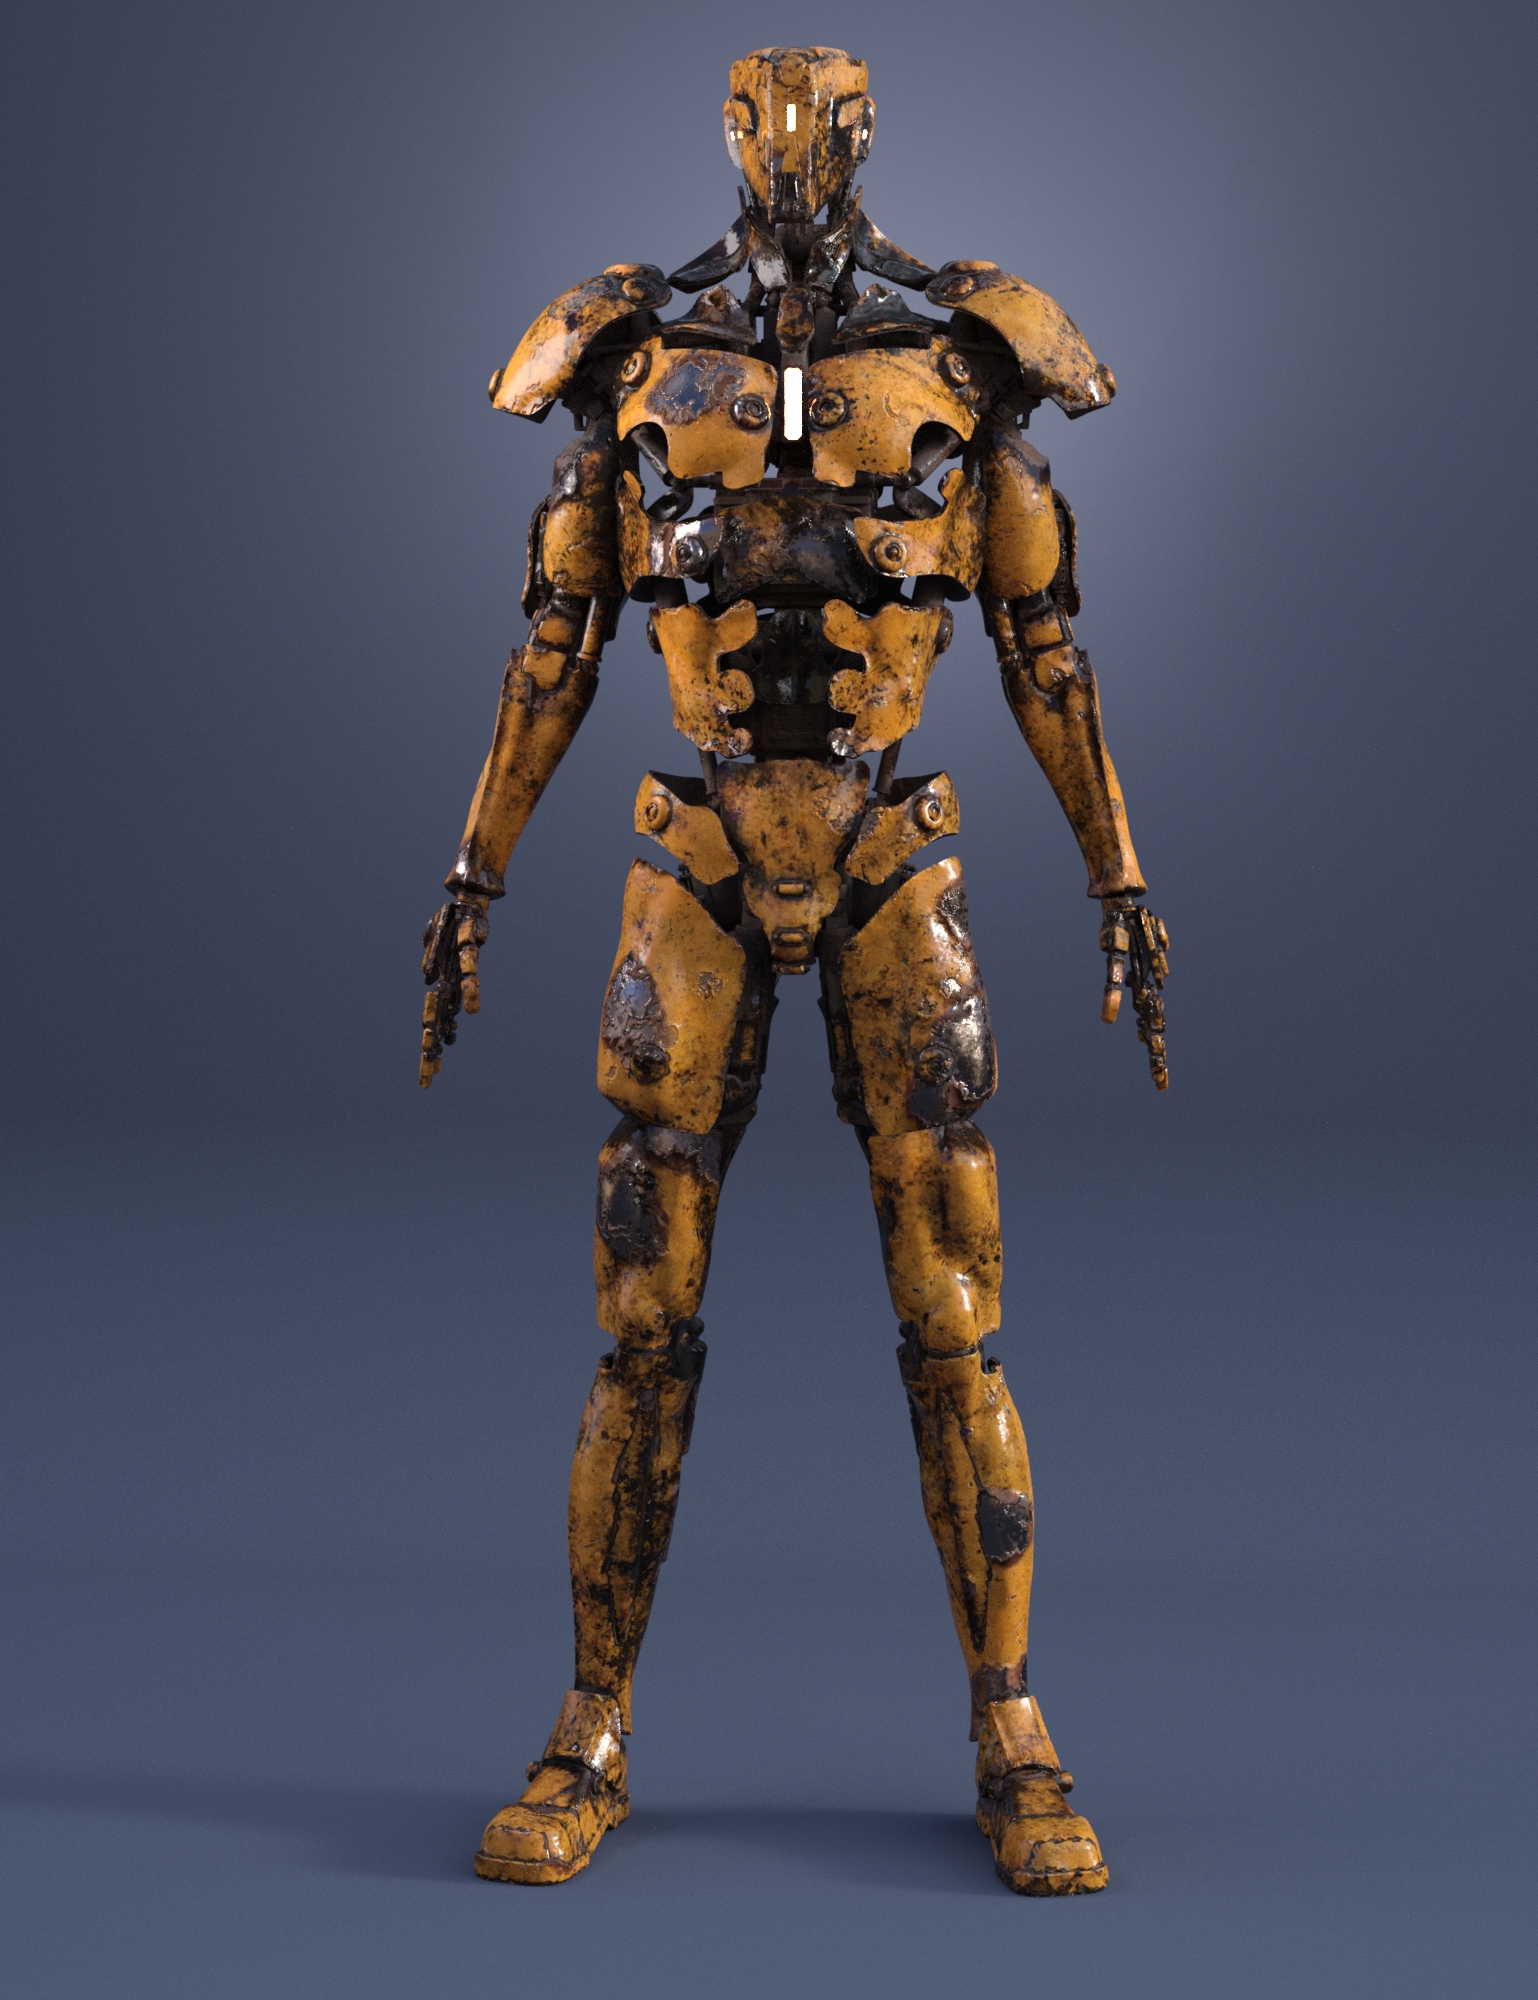 Bounty Hunter Textures for KPac by: Moonscape GraphicsSade, 3D Models by Daz 3D